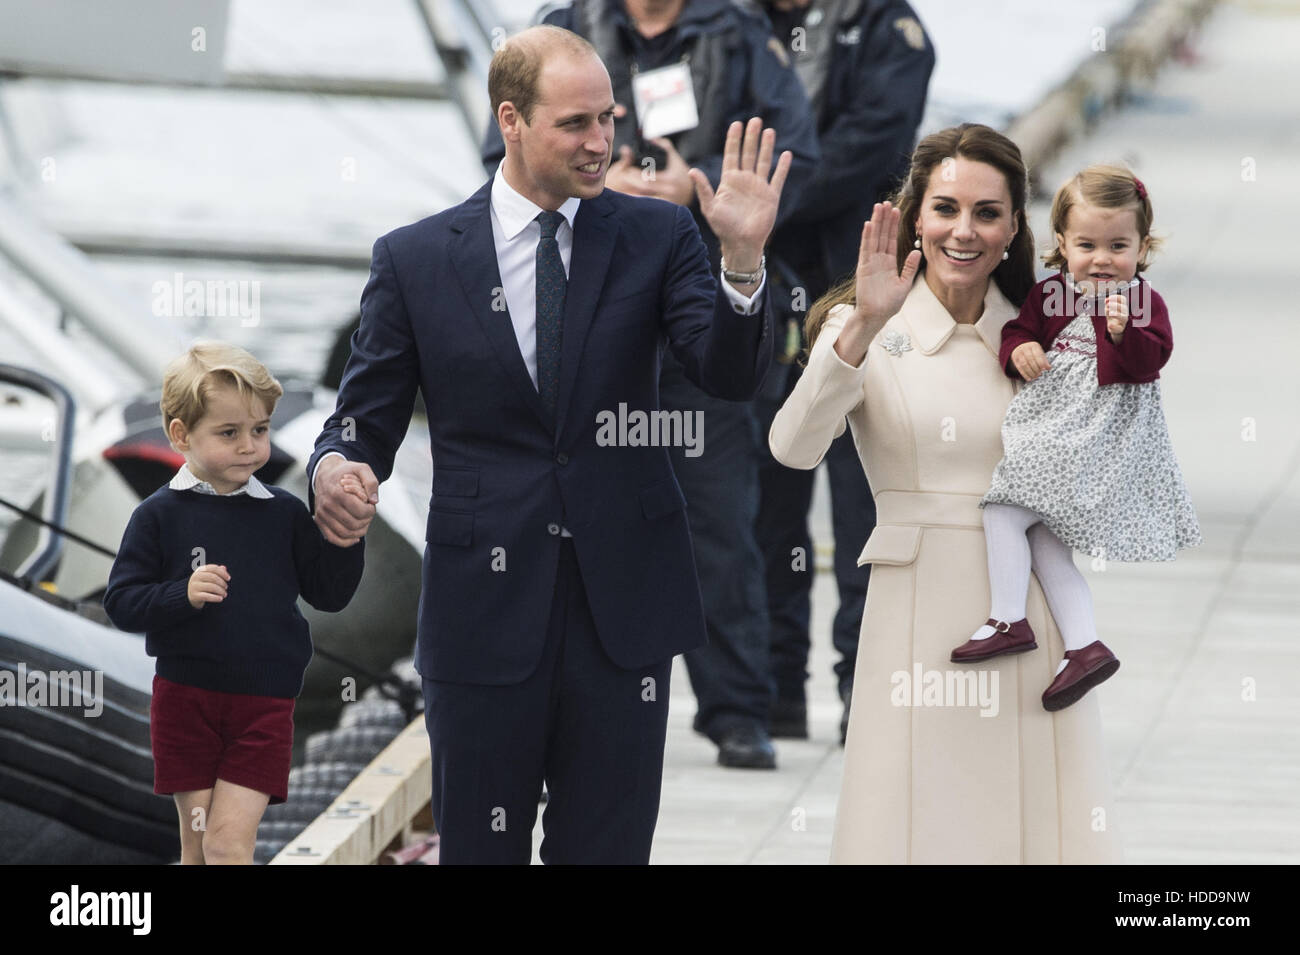 The Duchess of Cambridge, Princess Charlotte, Prince George and the Duke of Cambridge end their Canadian Royal Tour with an official farewell at Victoria Harbour Airport  Featuring: Prince George, Duke of Cambridge, Duchess of Cambridge, Princess Charlott Stock Photo